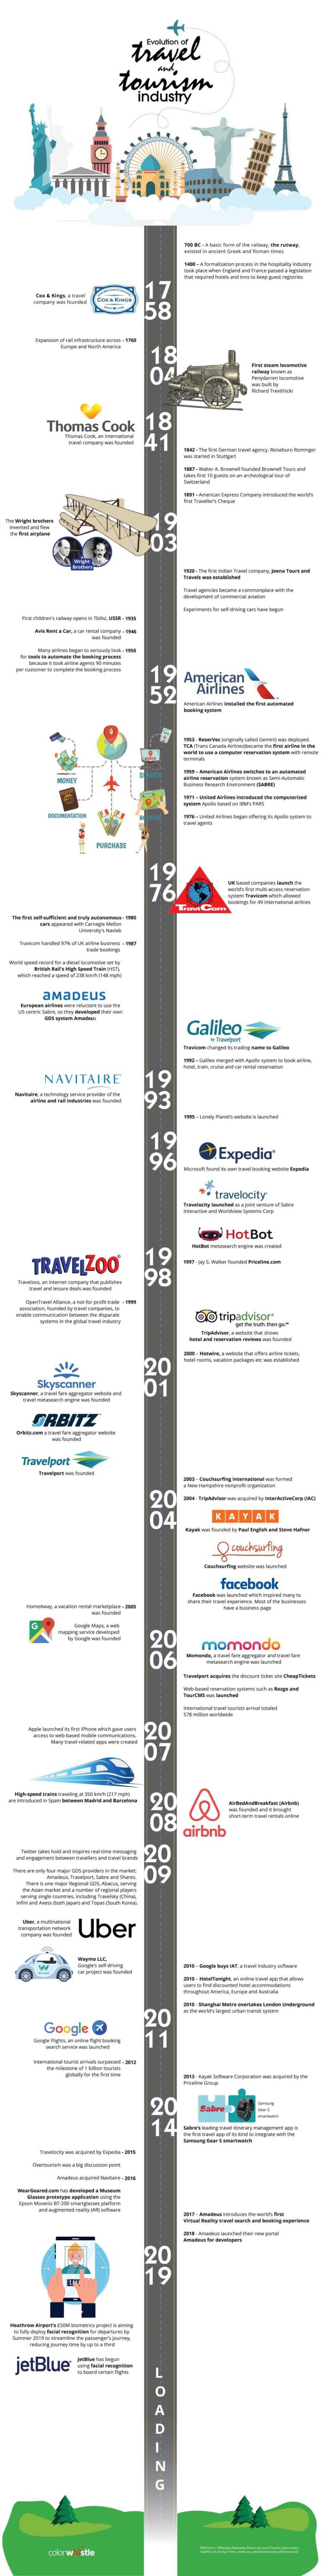 evolution of travel and tourism industry